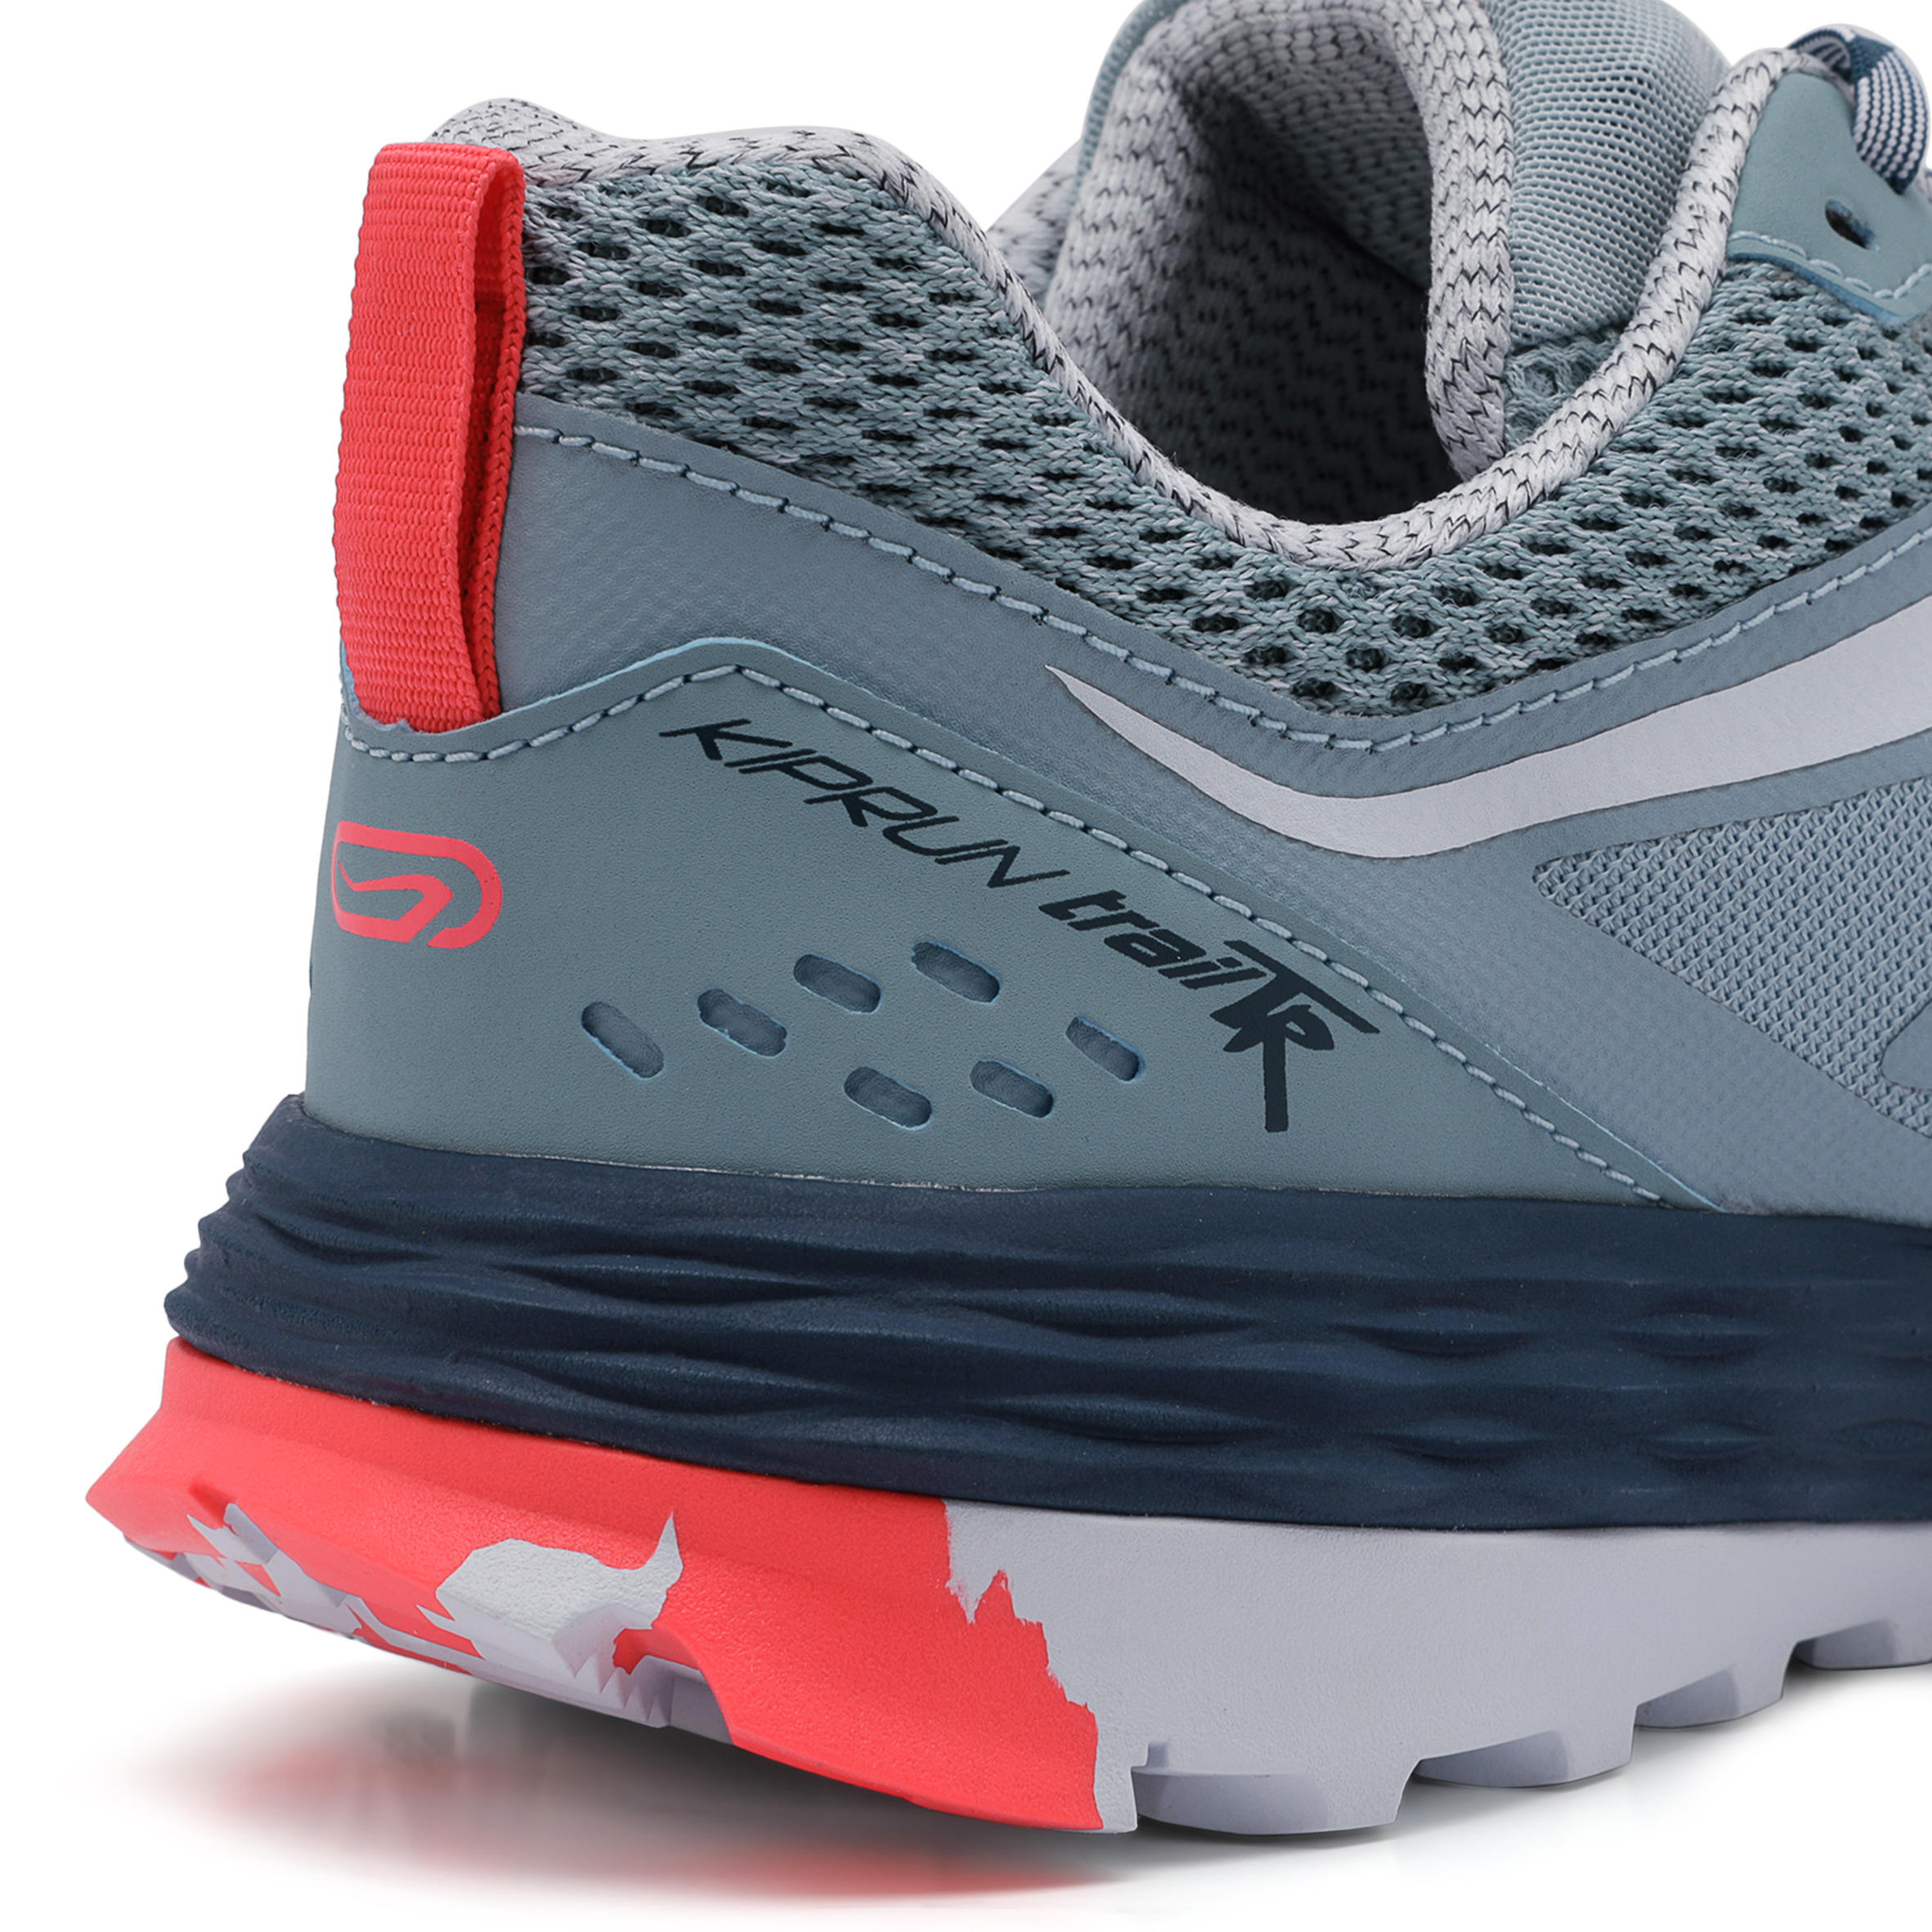 TRAIL RUNNING SHOES - LIGHT BLUE/PINK